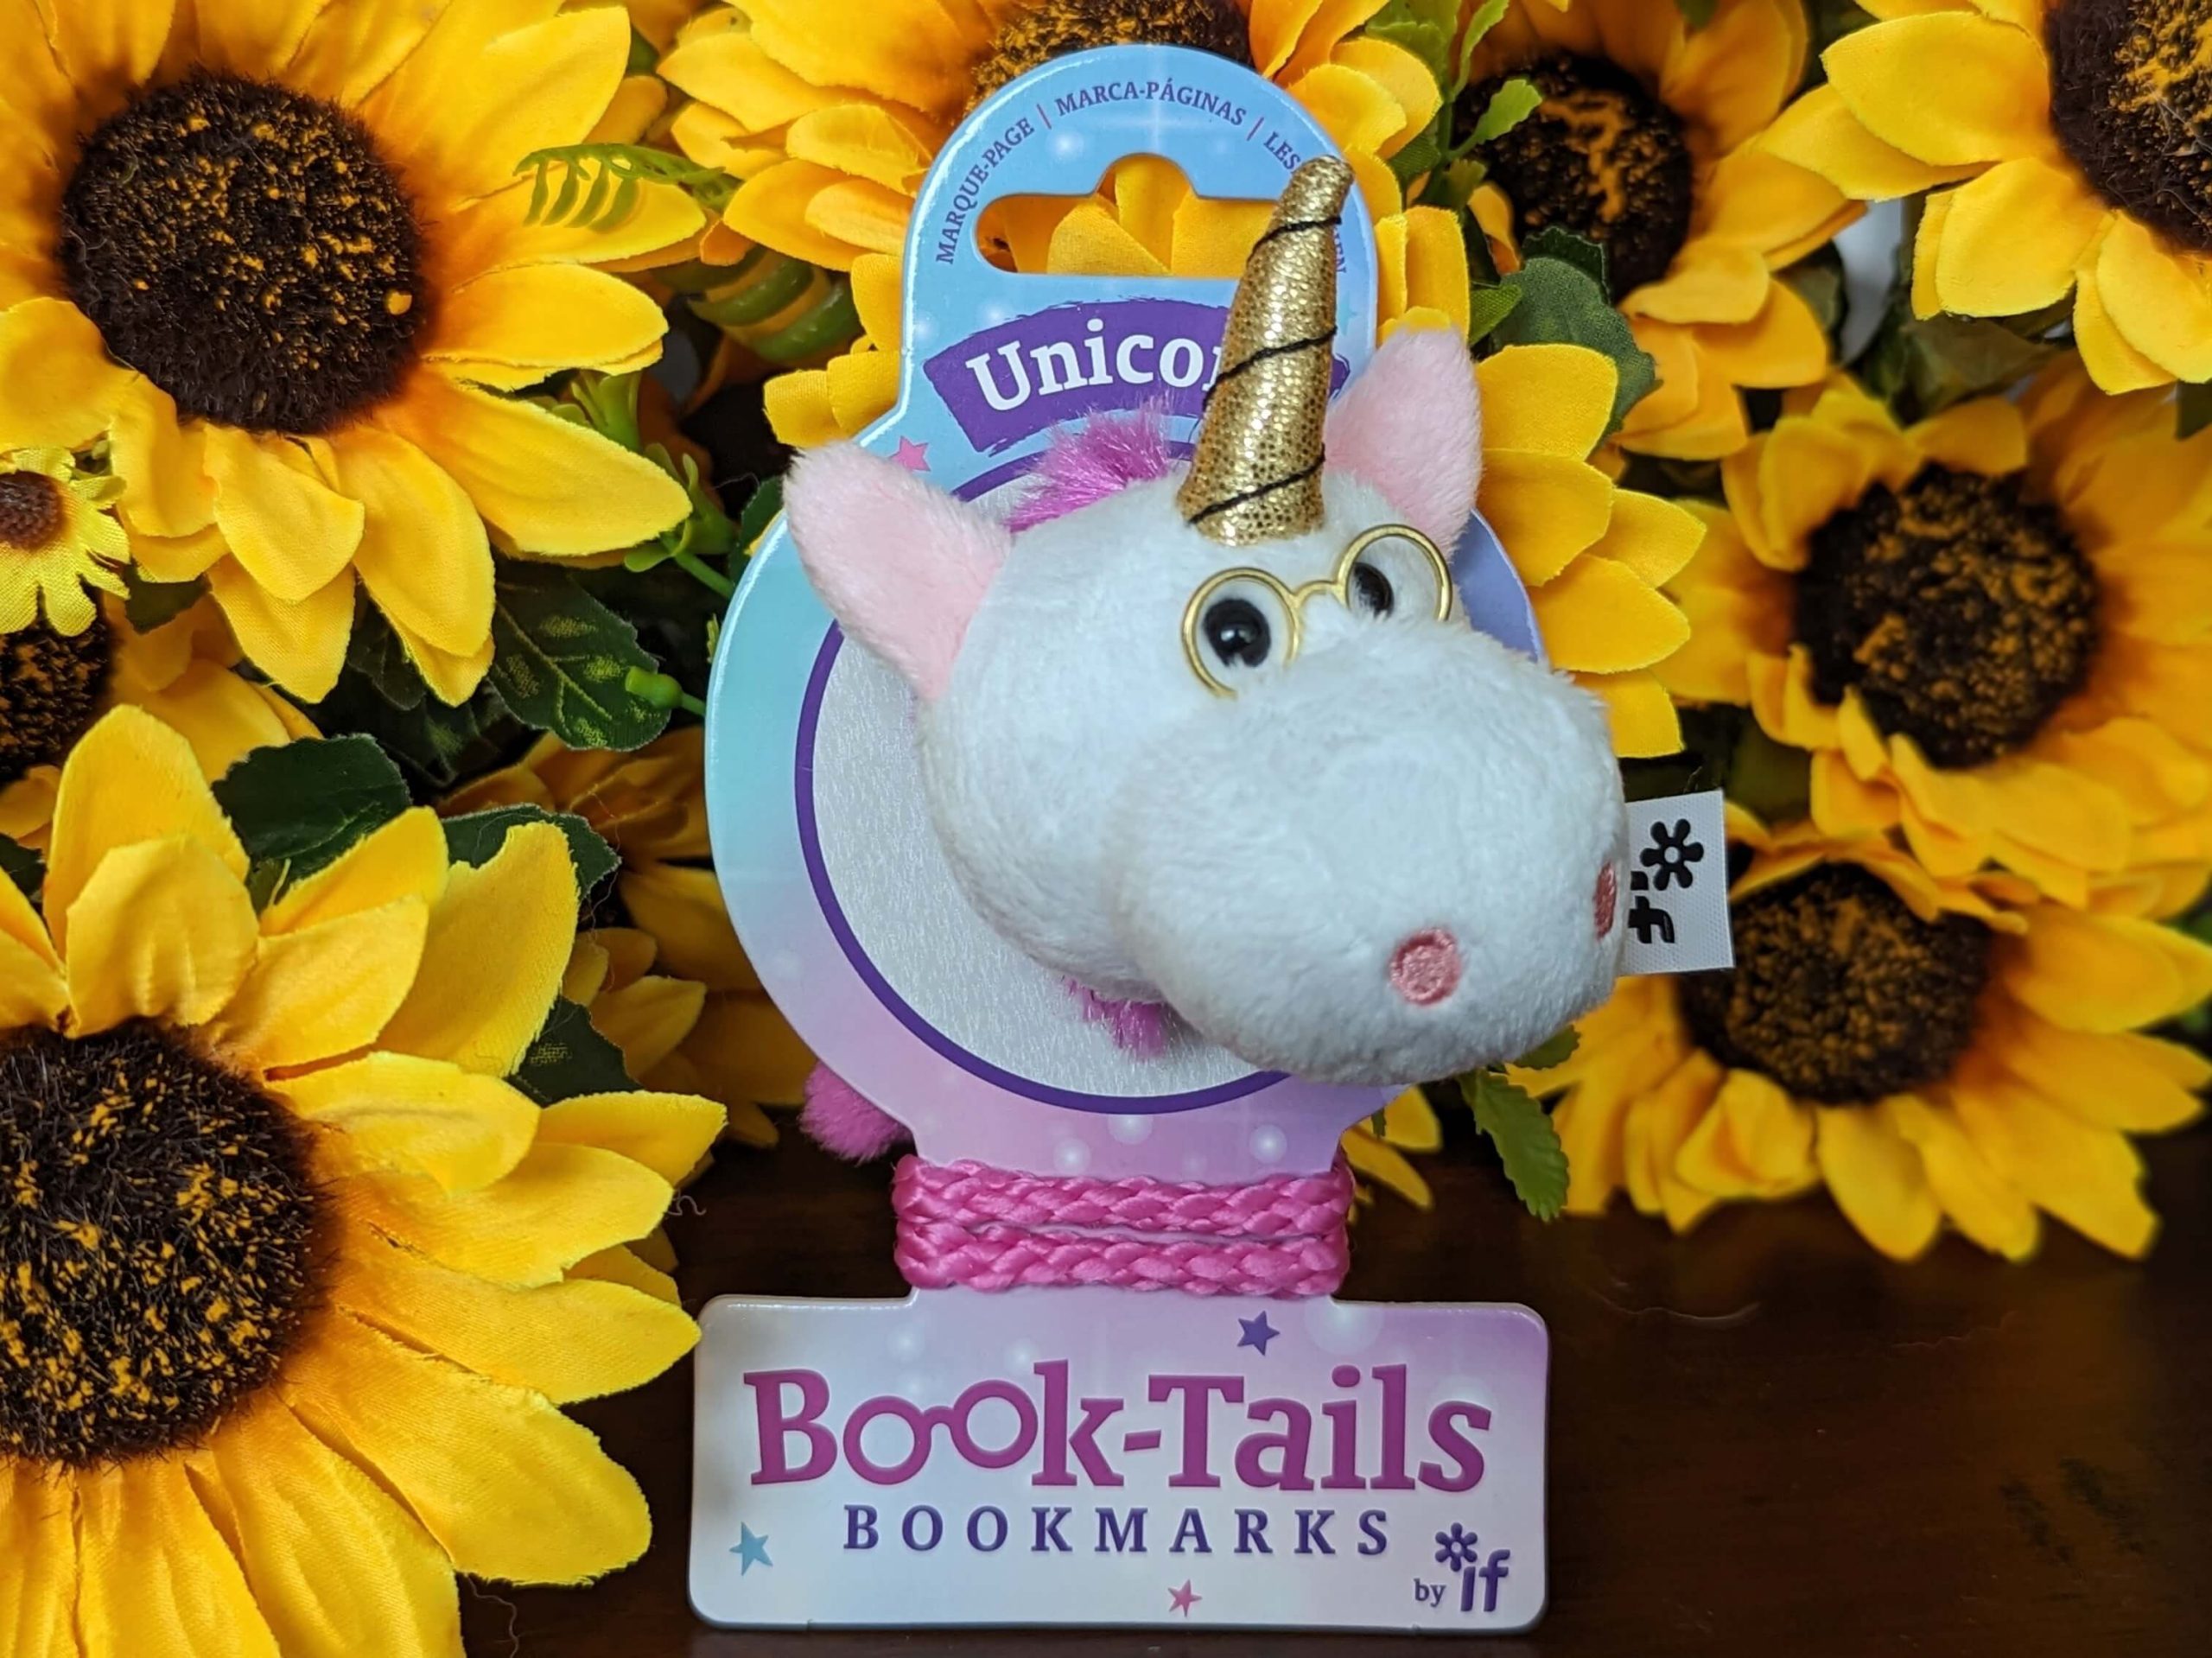 Unicorn bookmark ideal stocking filler for book-loving kids displayed against a bunch of sunflowers